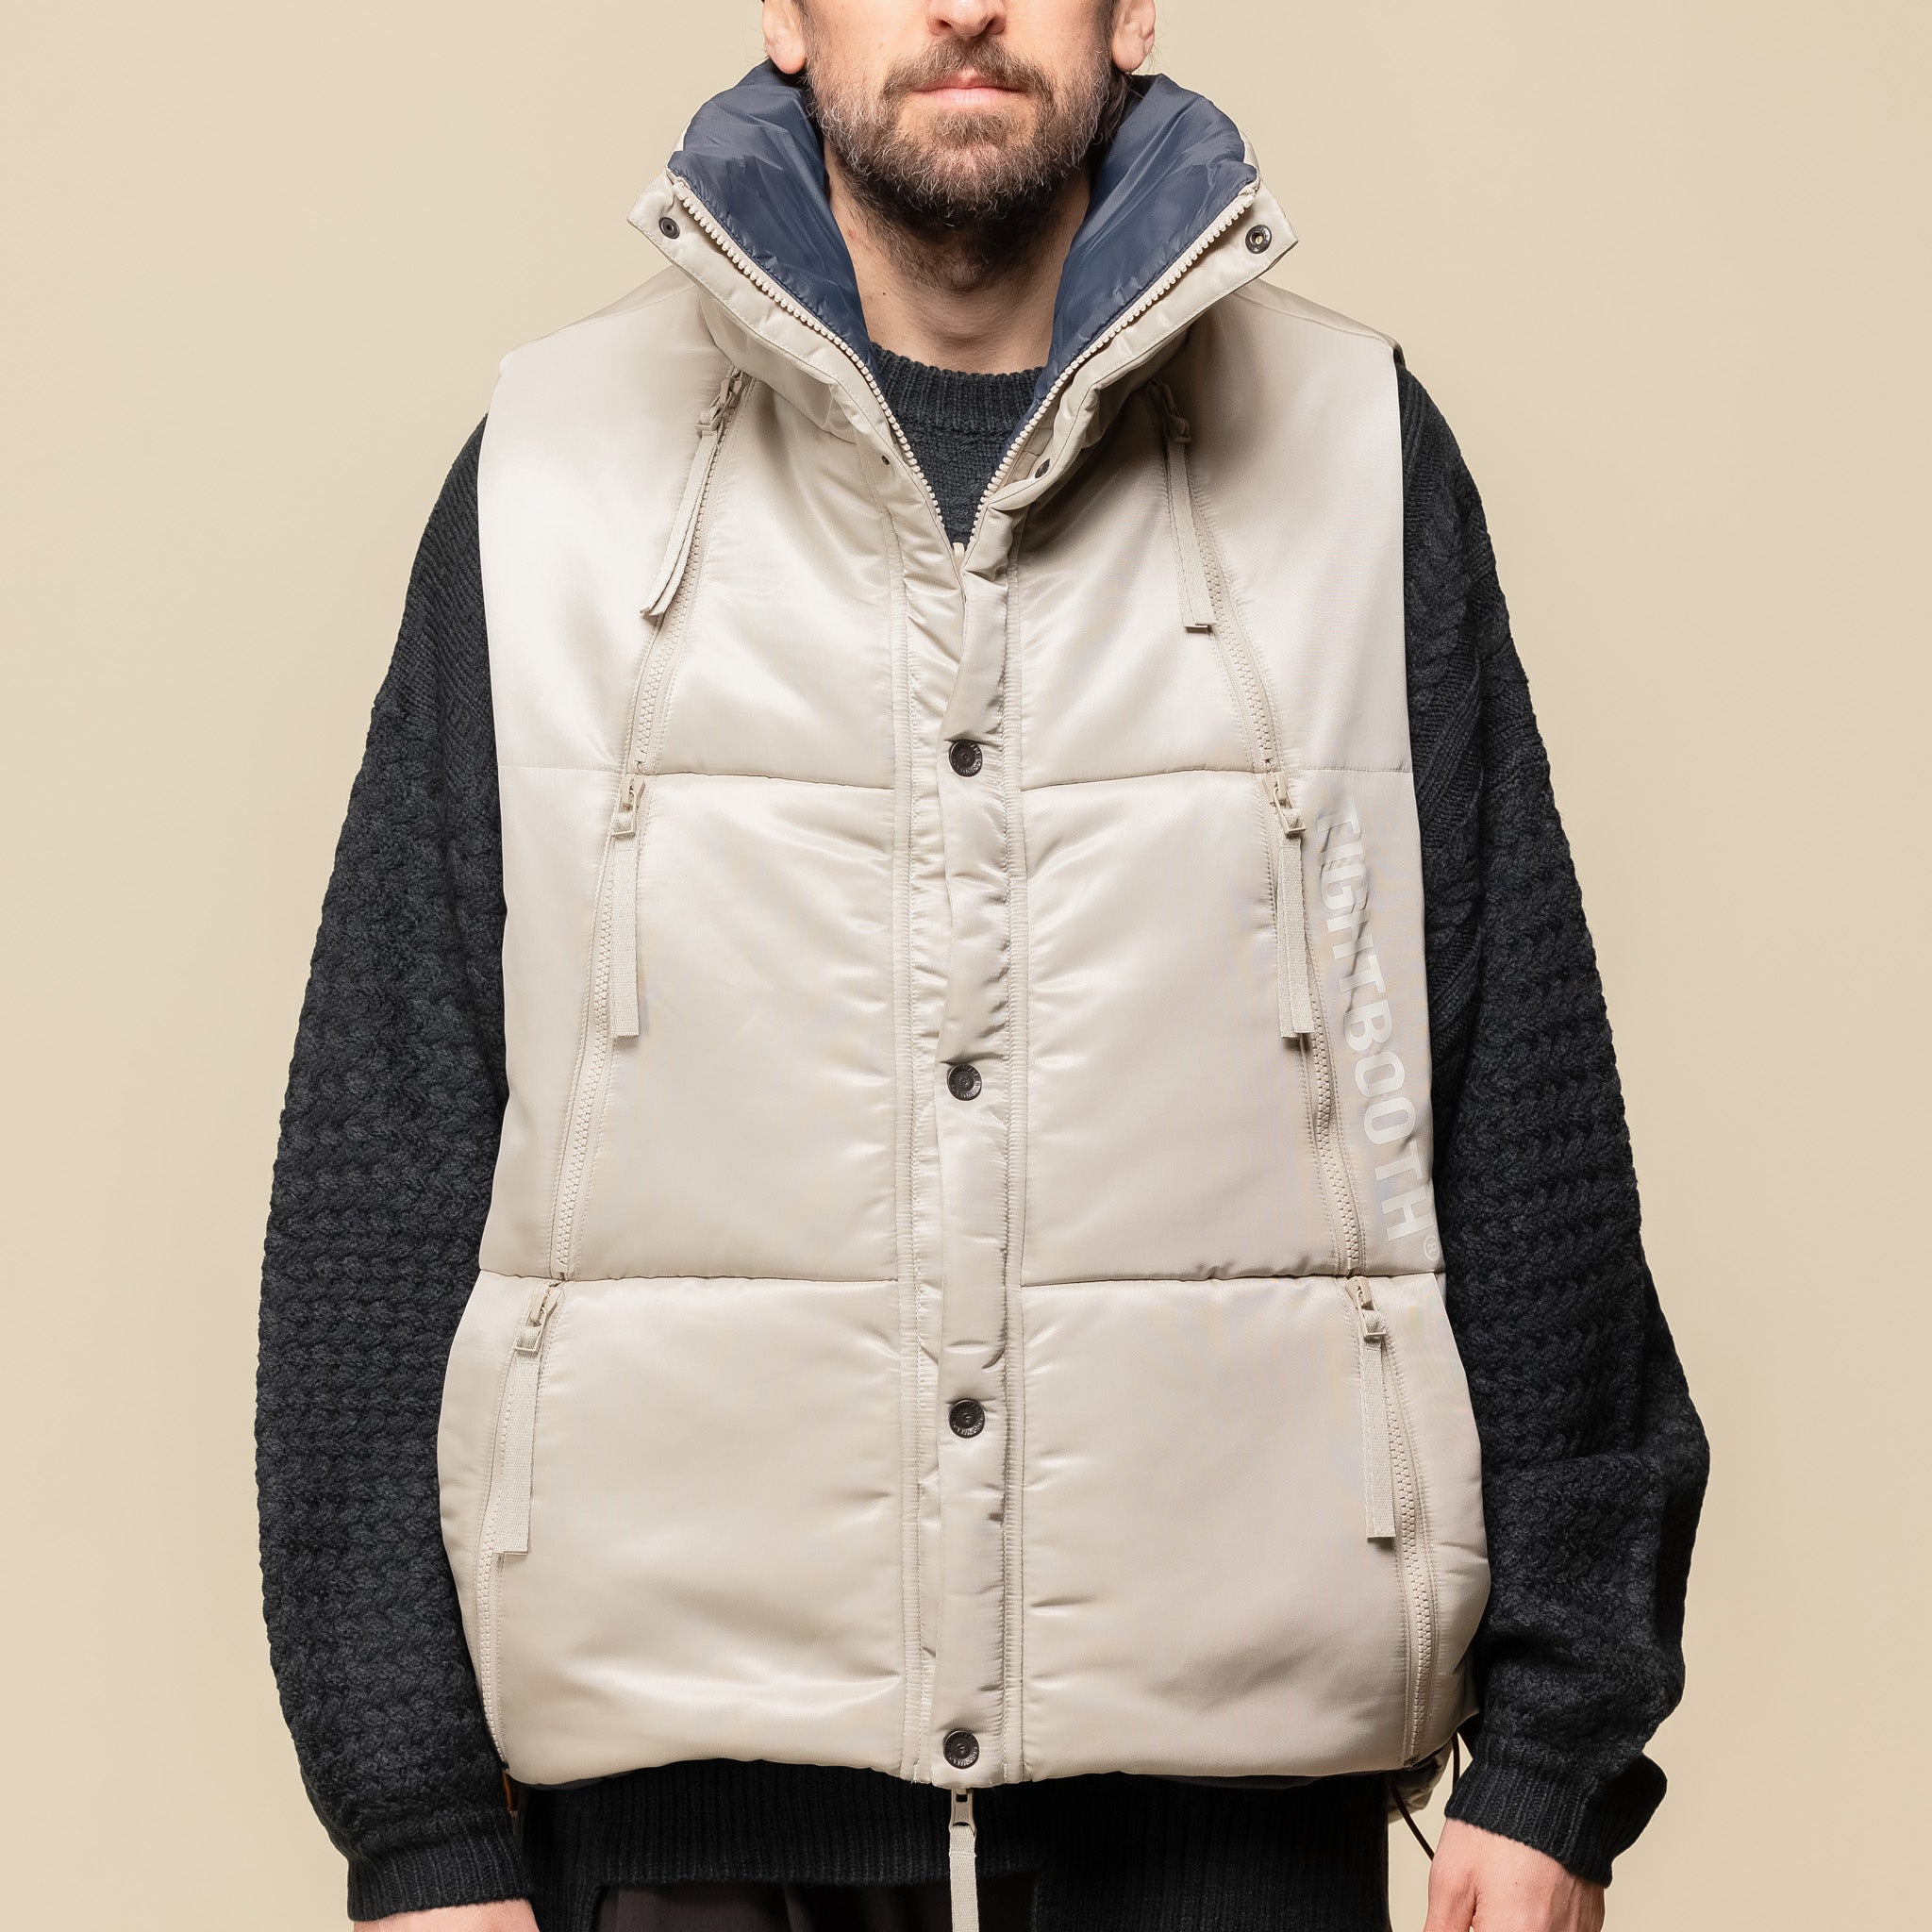 GOOPiMADE® x TIGHTBOOTH “GMT-01V” - 2-Way Padded Down Vest - Paper (Beige)  x Navy